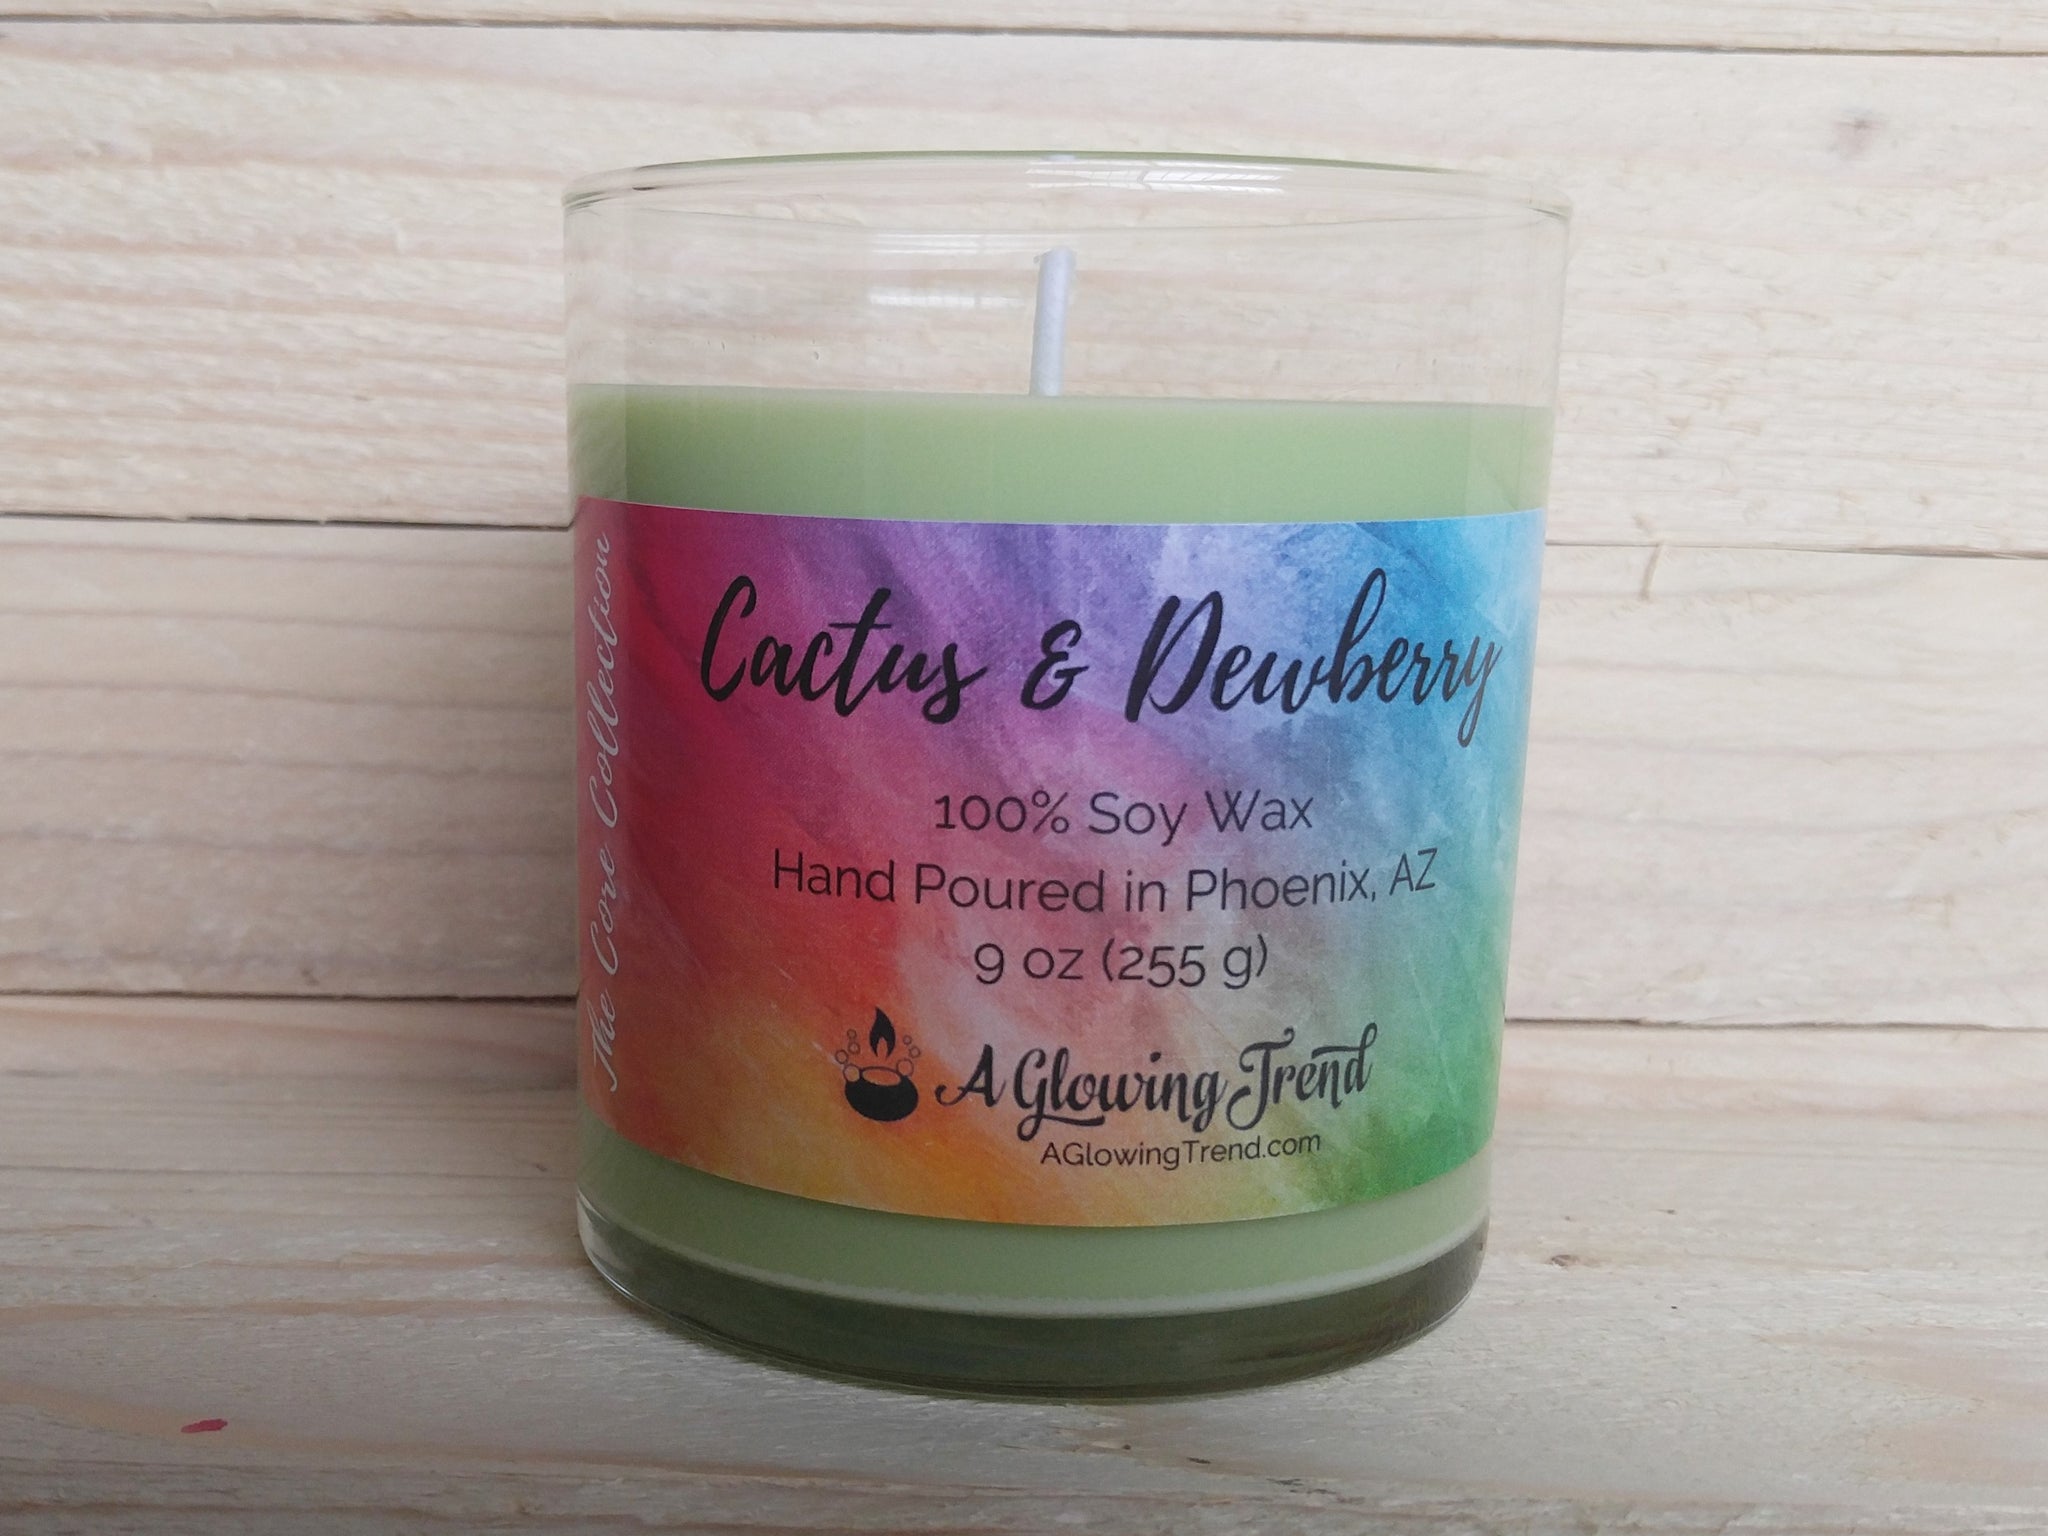 A 9 oz glass tumbler containing a light green Cactus and Dewberry scented soy candle by A Glowing Trend